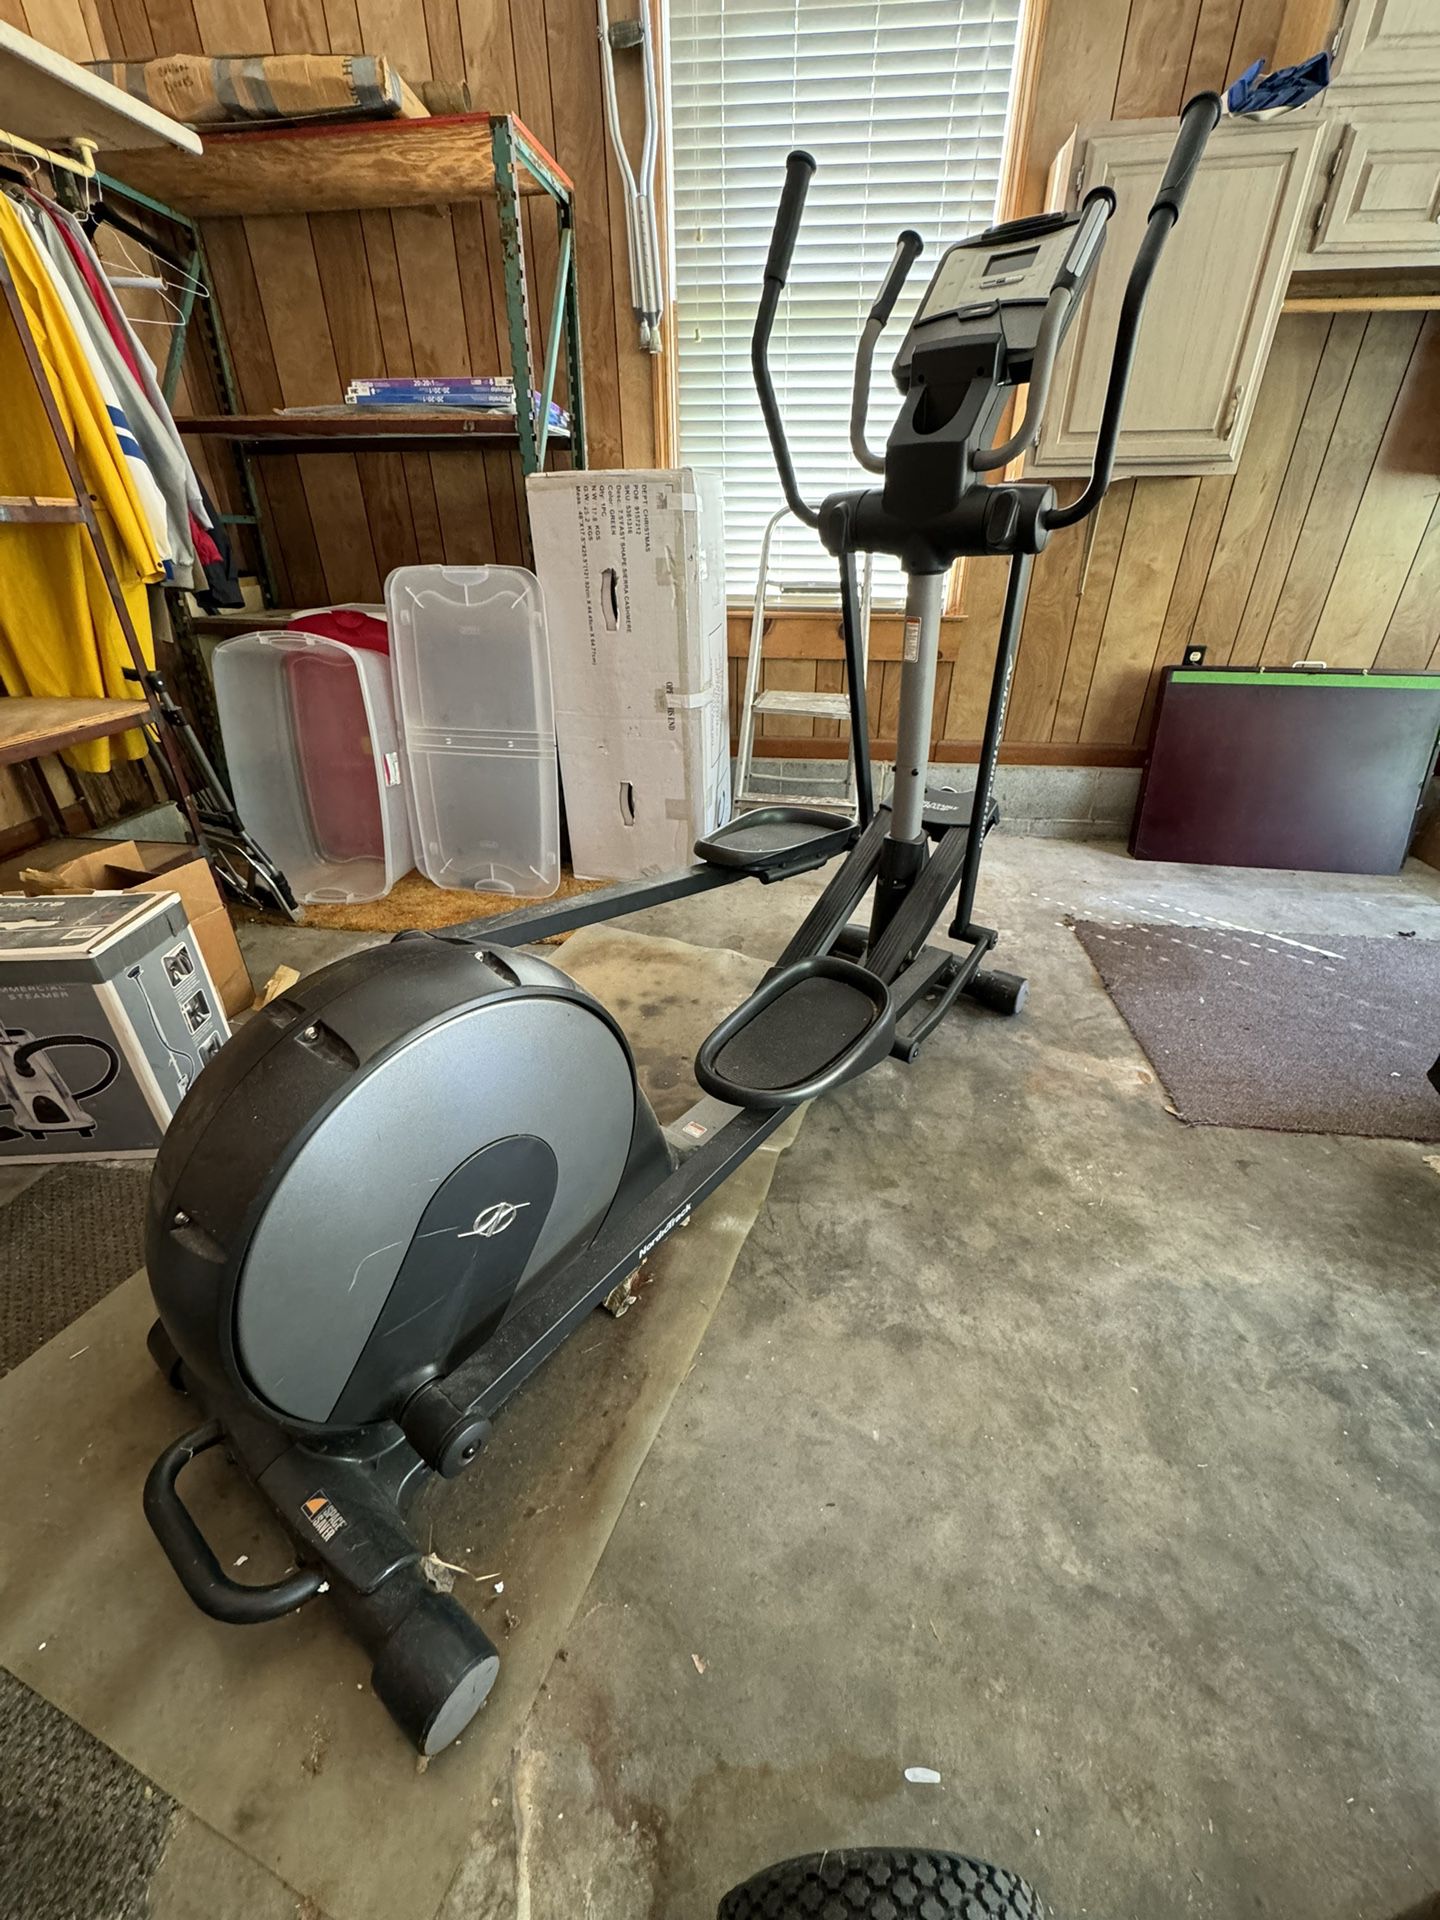 FREE Nordic Track ELLIPTICAL Must Pickup By End Of Day This Friday 